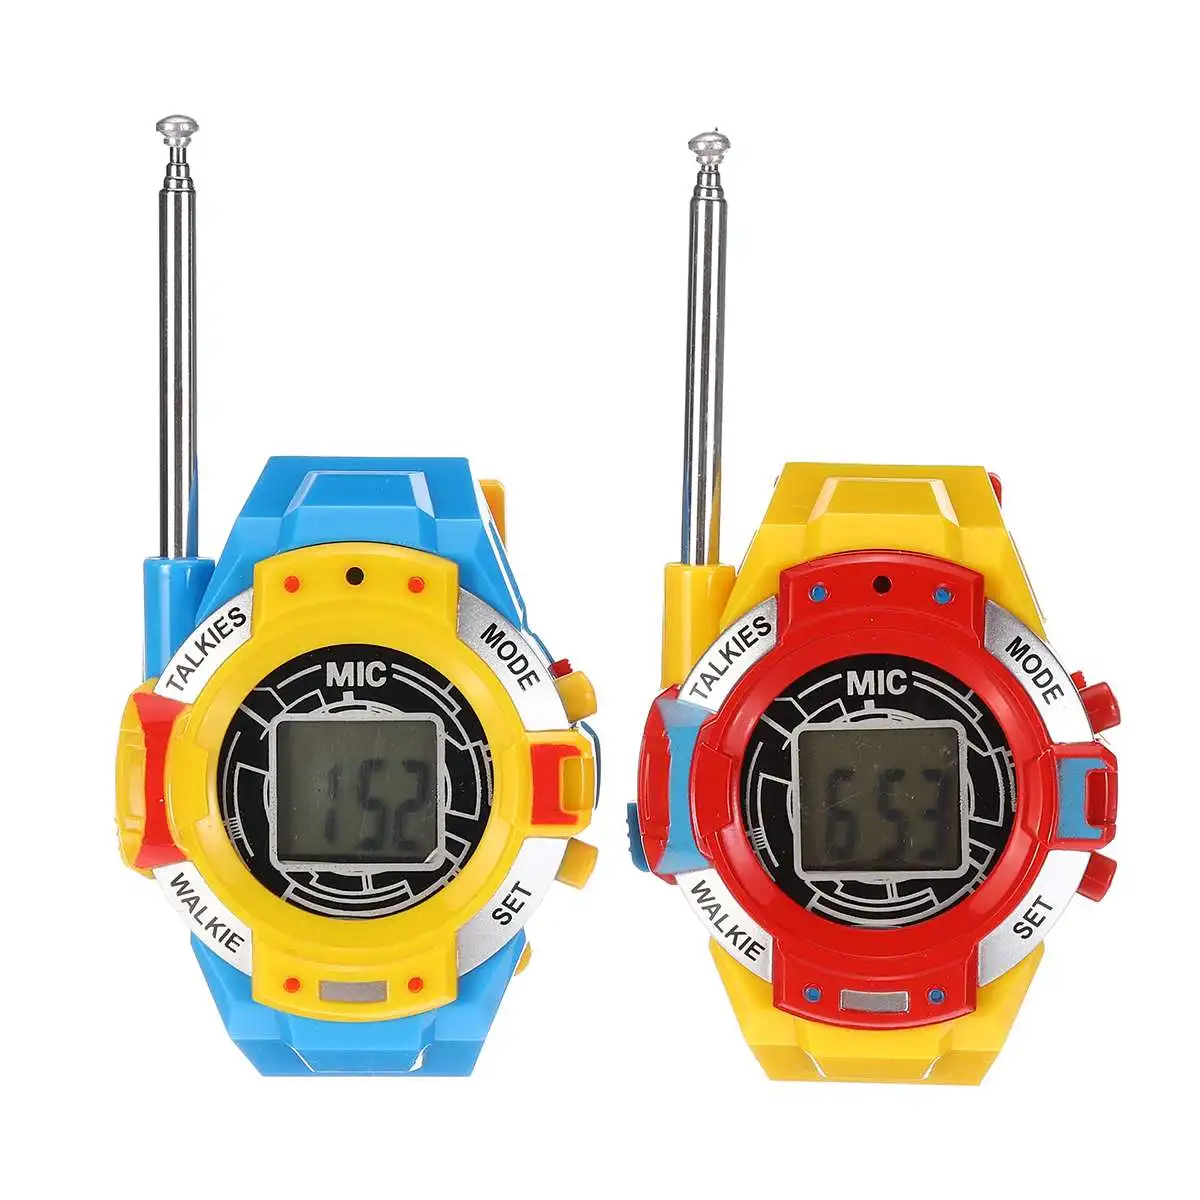 2Pcs Smart Watches Walkie Talkies with Time Display Function Watch Kids Watches Two-way Radios Interphone Clock Gift Hot Sale